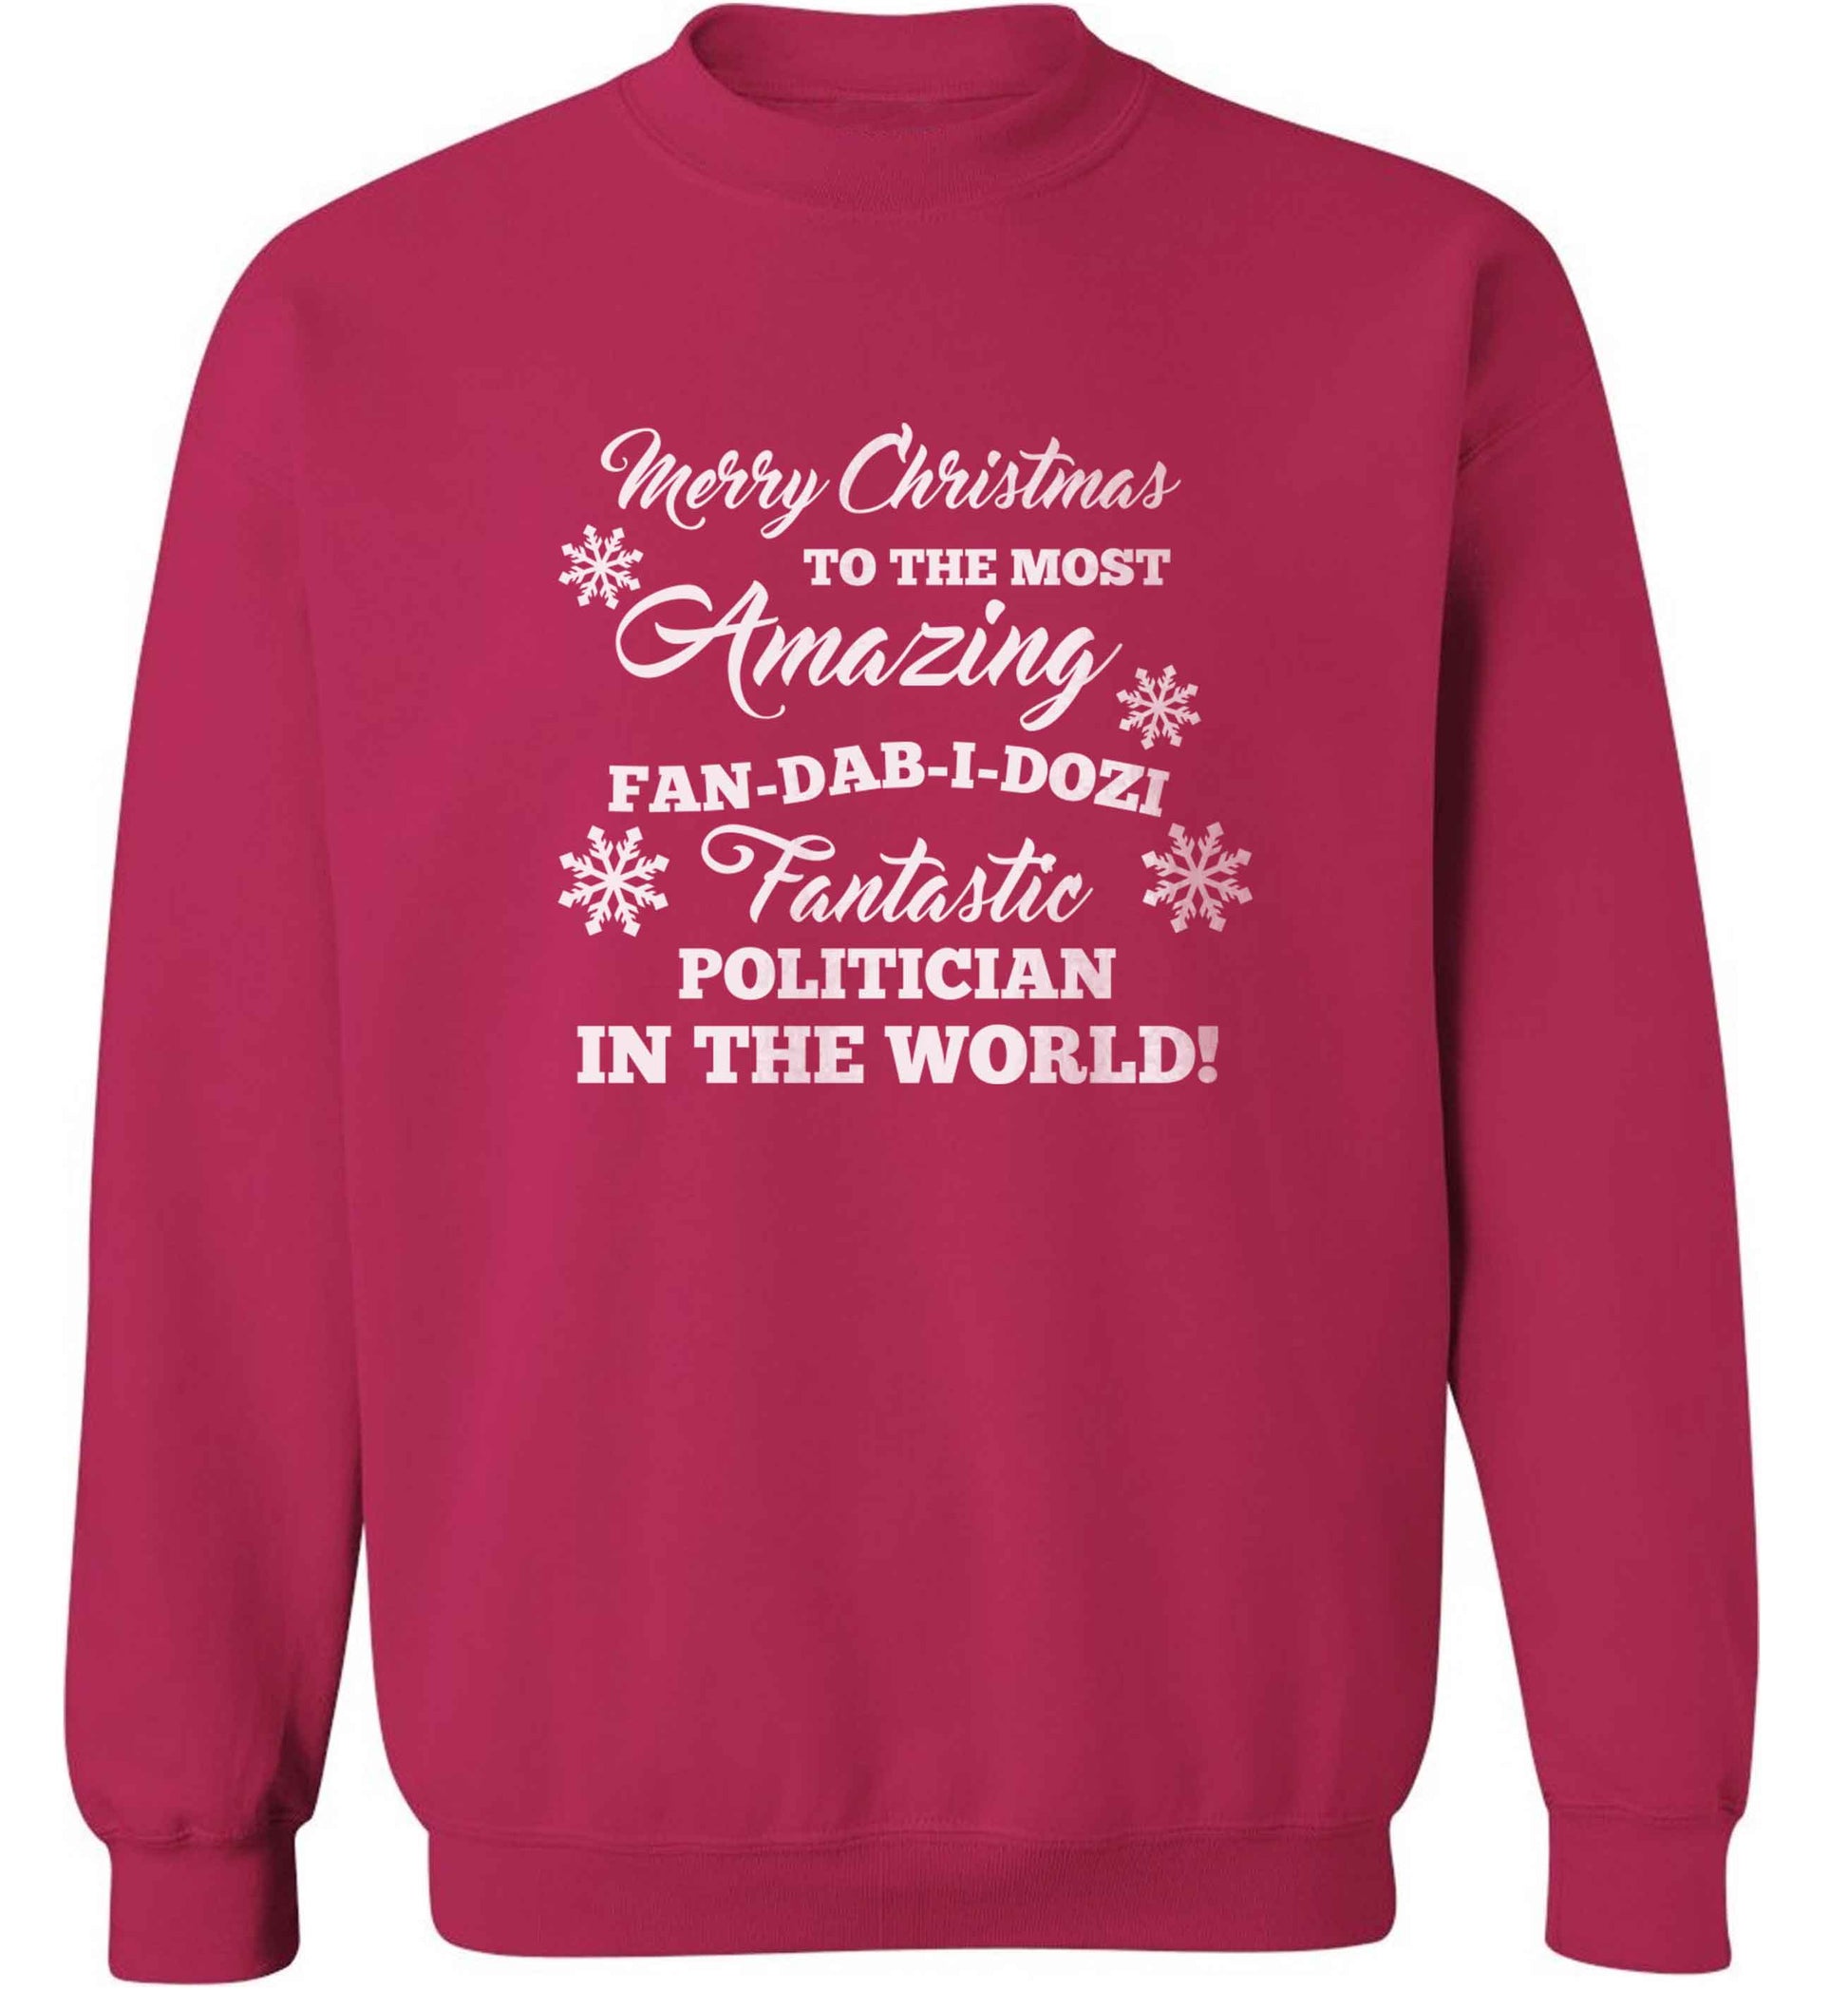 Merry Christmas to the most amazing politician in the world! adult's unisex pink sweater 2XL